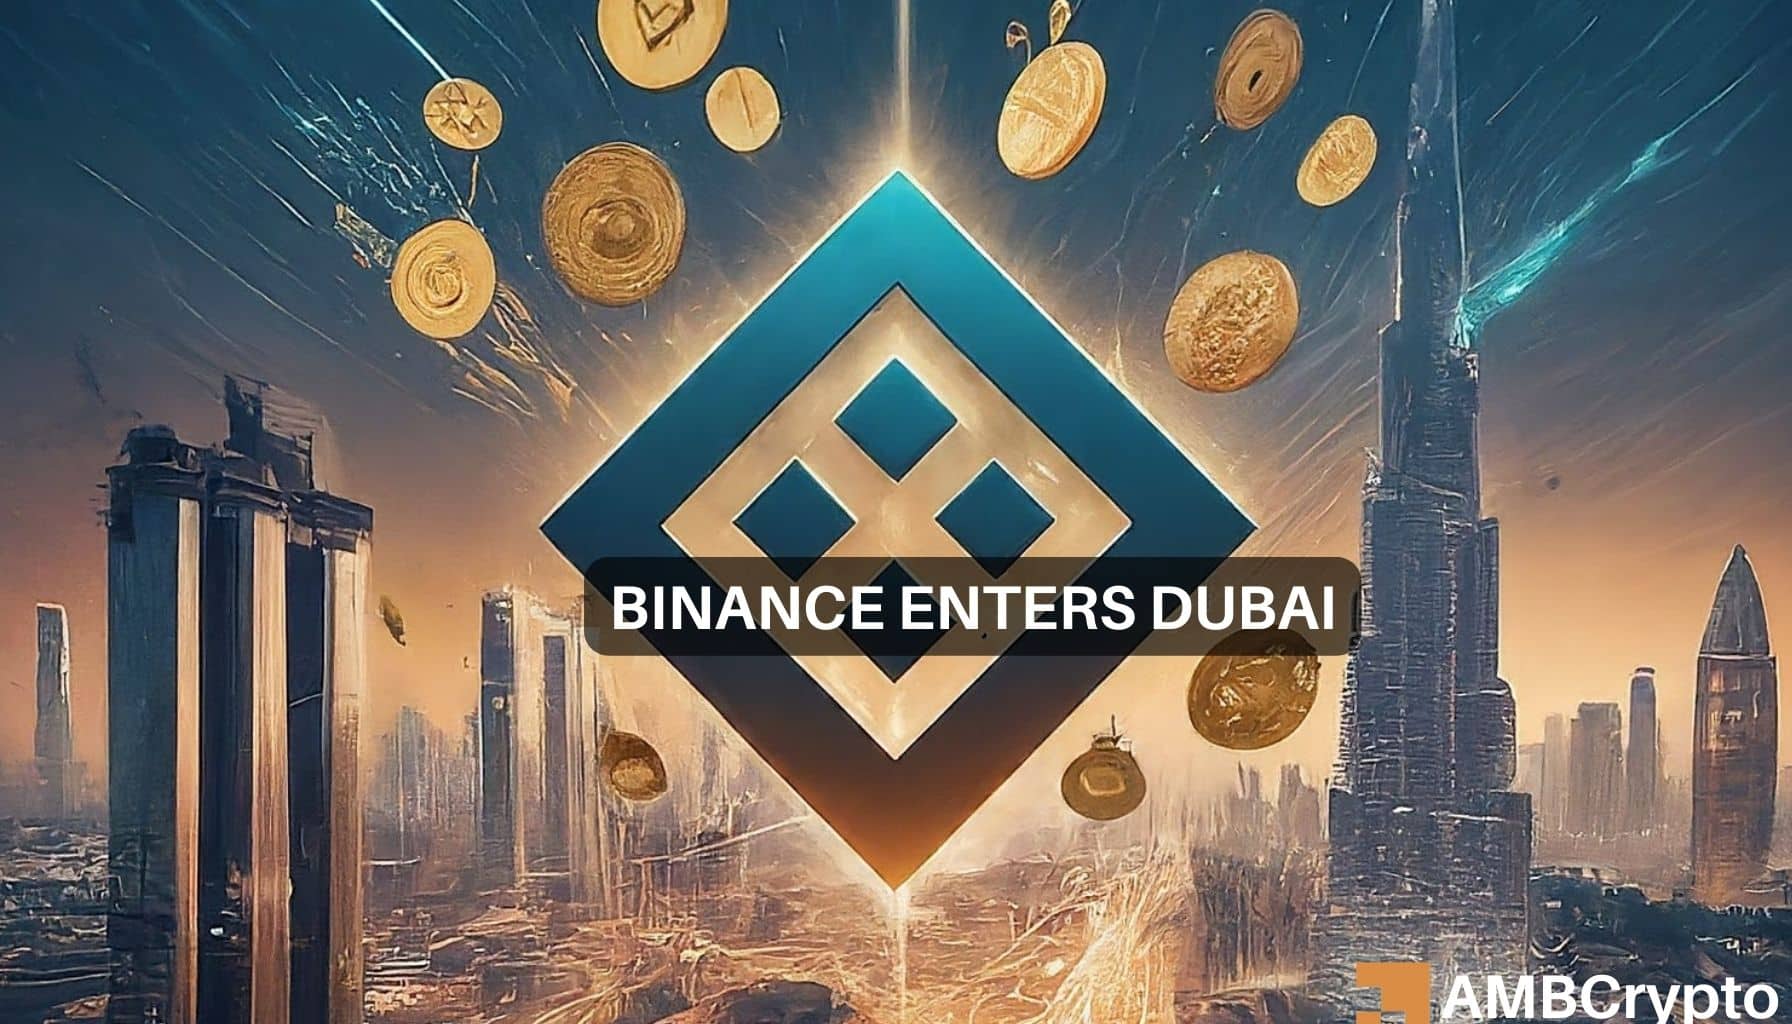 Binance expands its Middle East presence: What’s next for BNB?